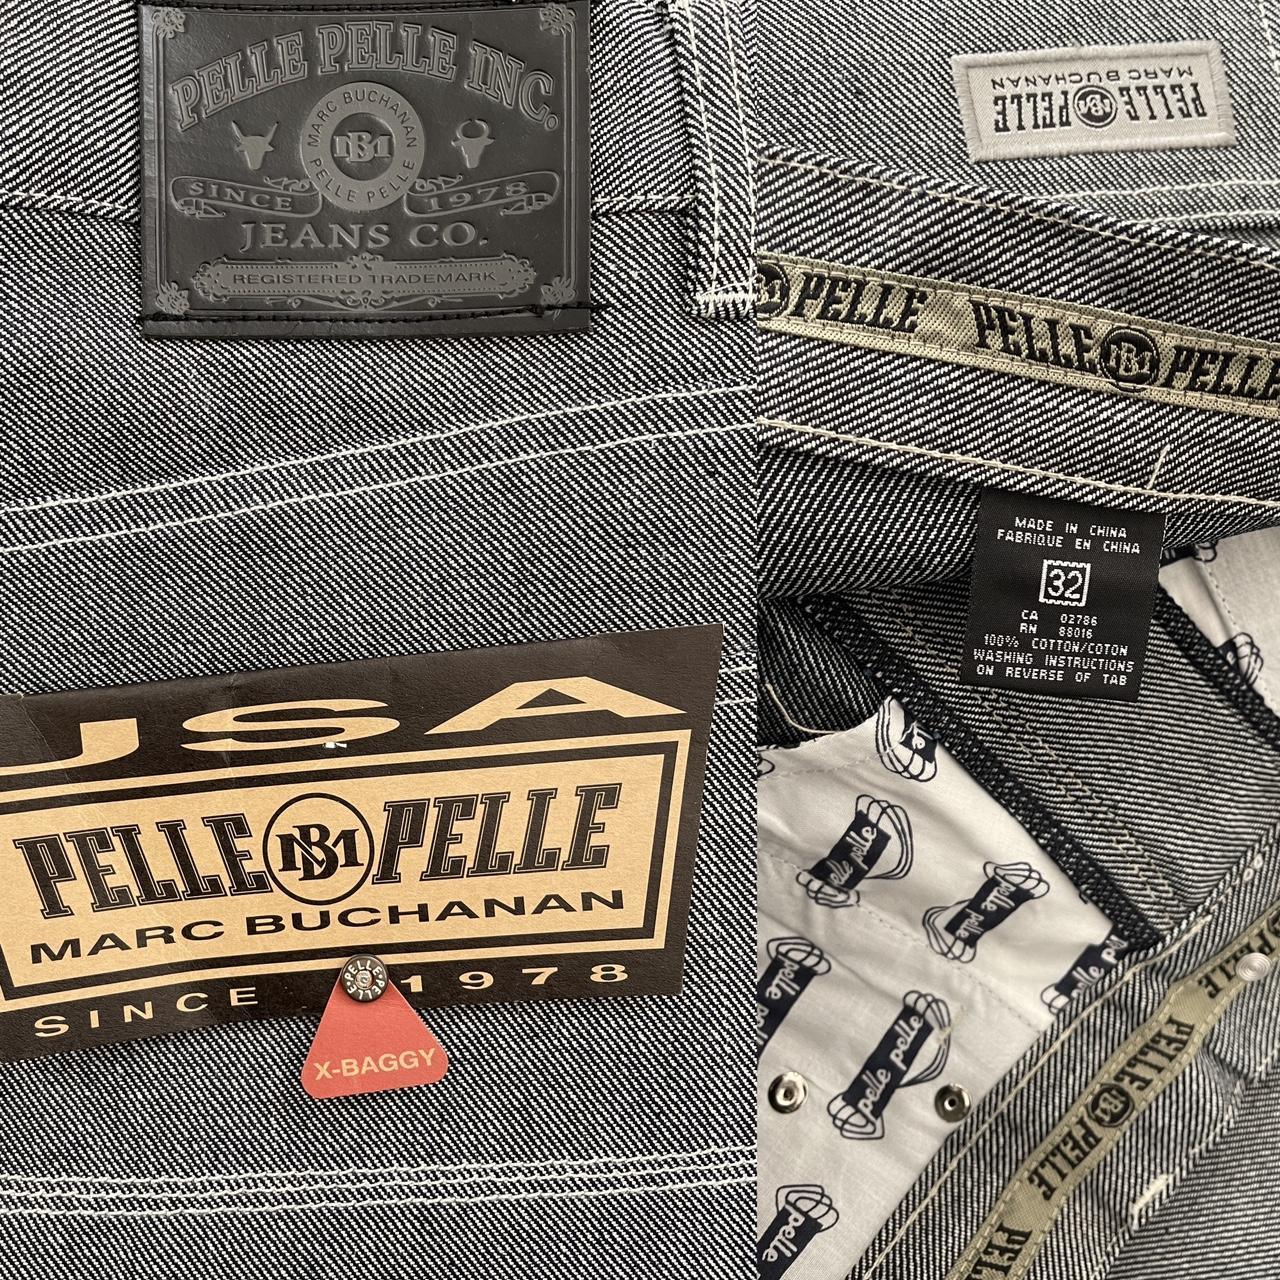 Pelle Pelle Panther Jeans - Known Source